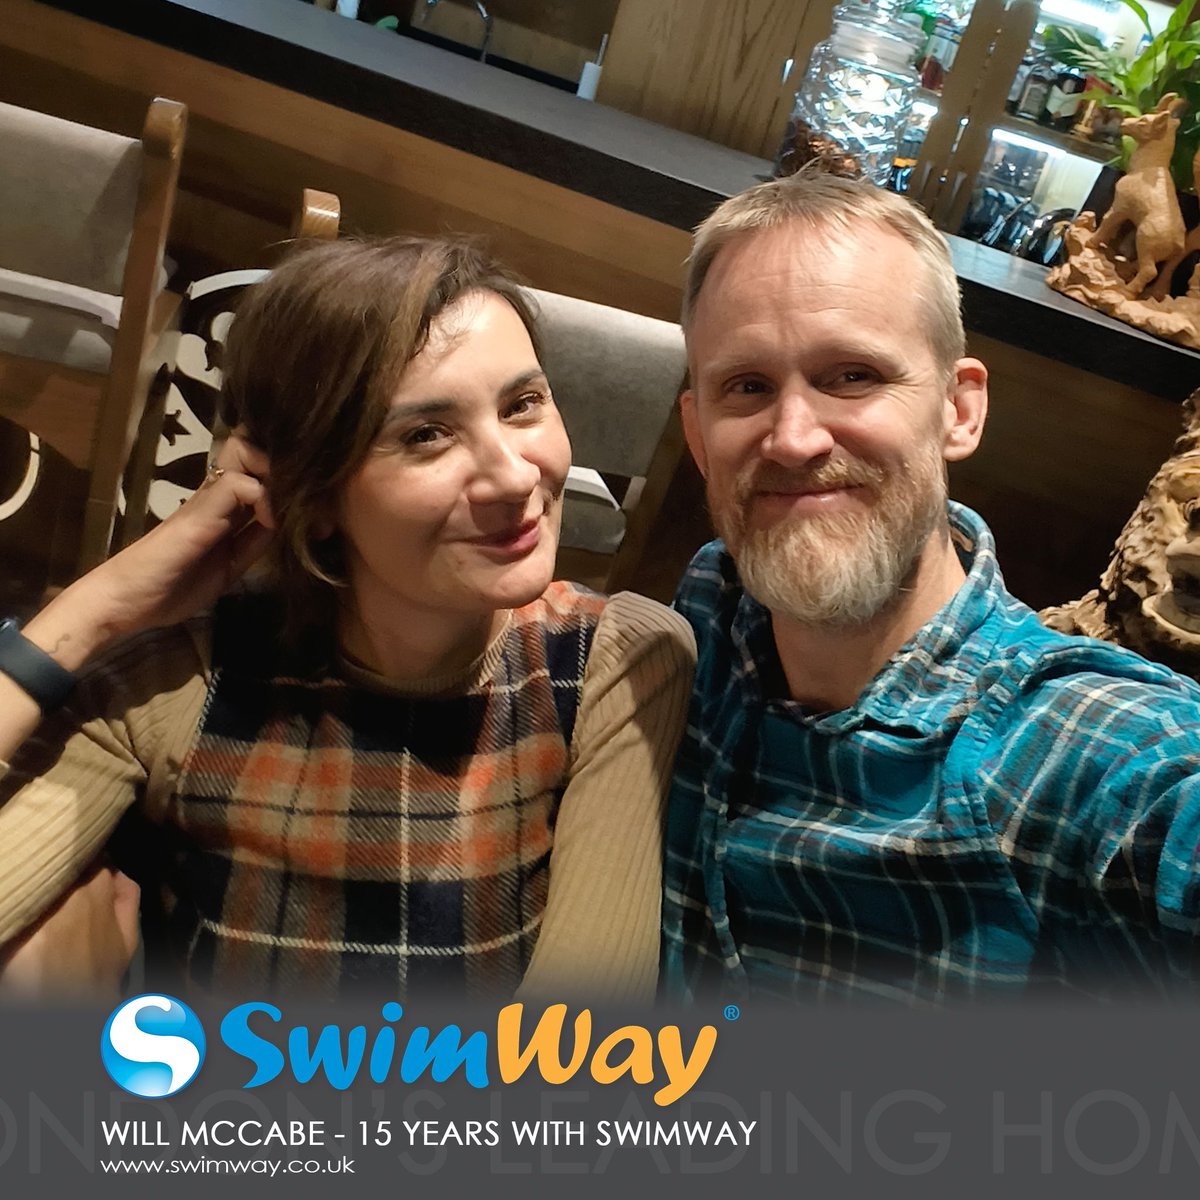 Join us in celebrating a milestone at SwimWay! A special shoutout to Will McCabe, marking an incredible 15 years with us. #TeamLongevity #WorkAnniversary #CareerGrowth #CompanyJourney #CelebratingTeam #SwimwayLegacy #15YearsStrong #FutureSuccess #EmployeeAppreciation